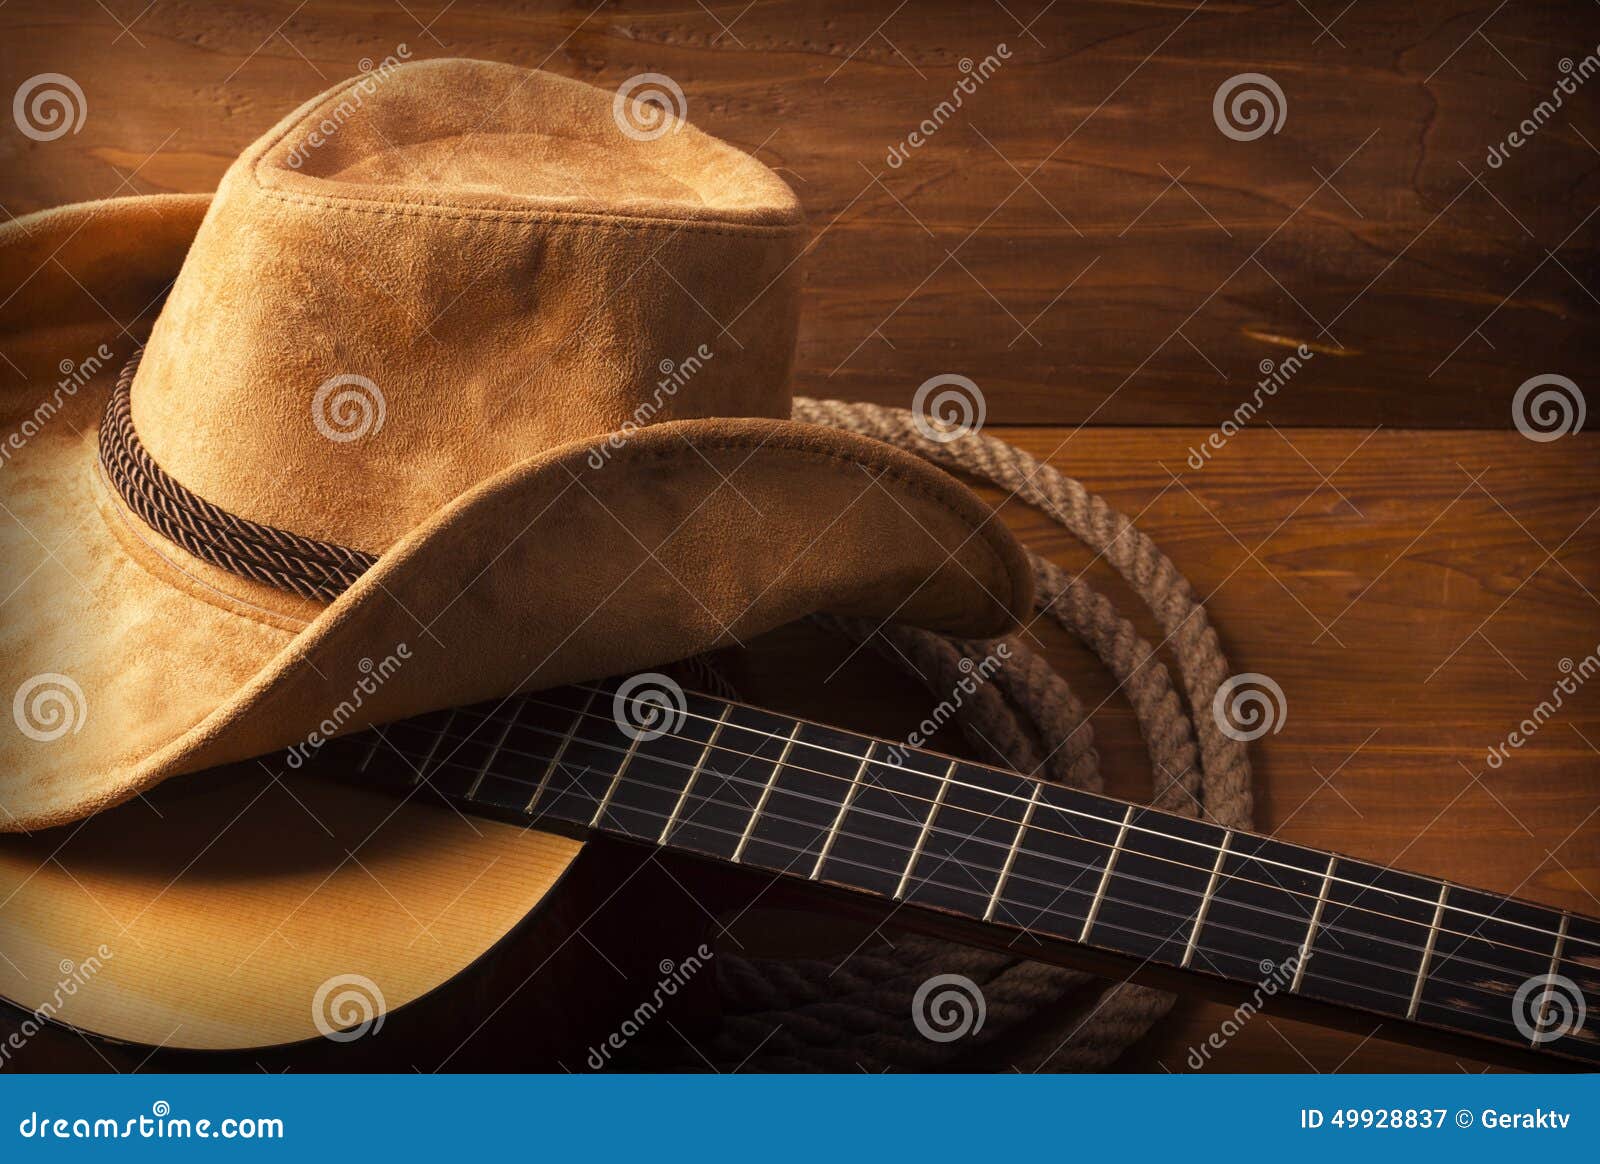 country music background with guitar